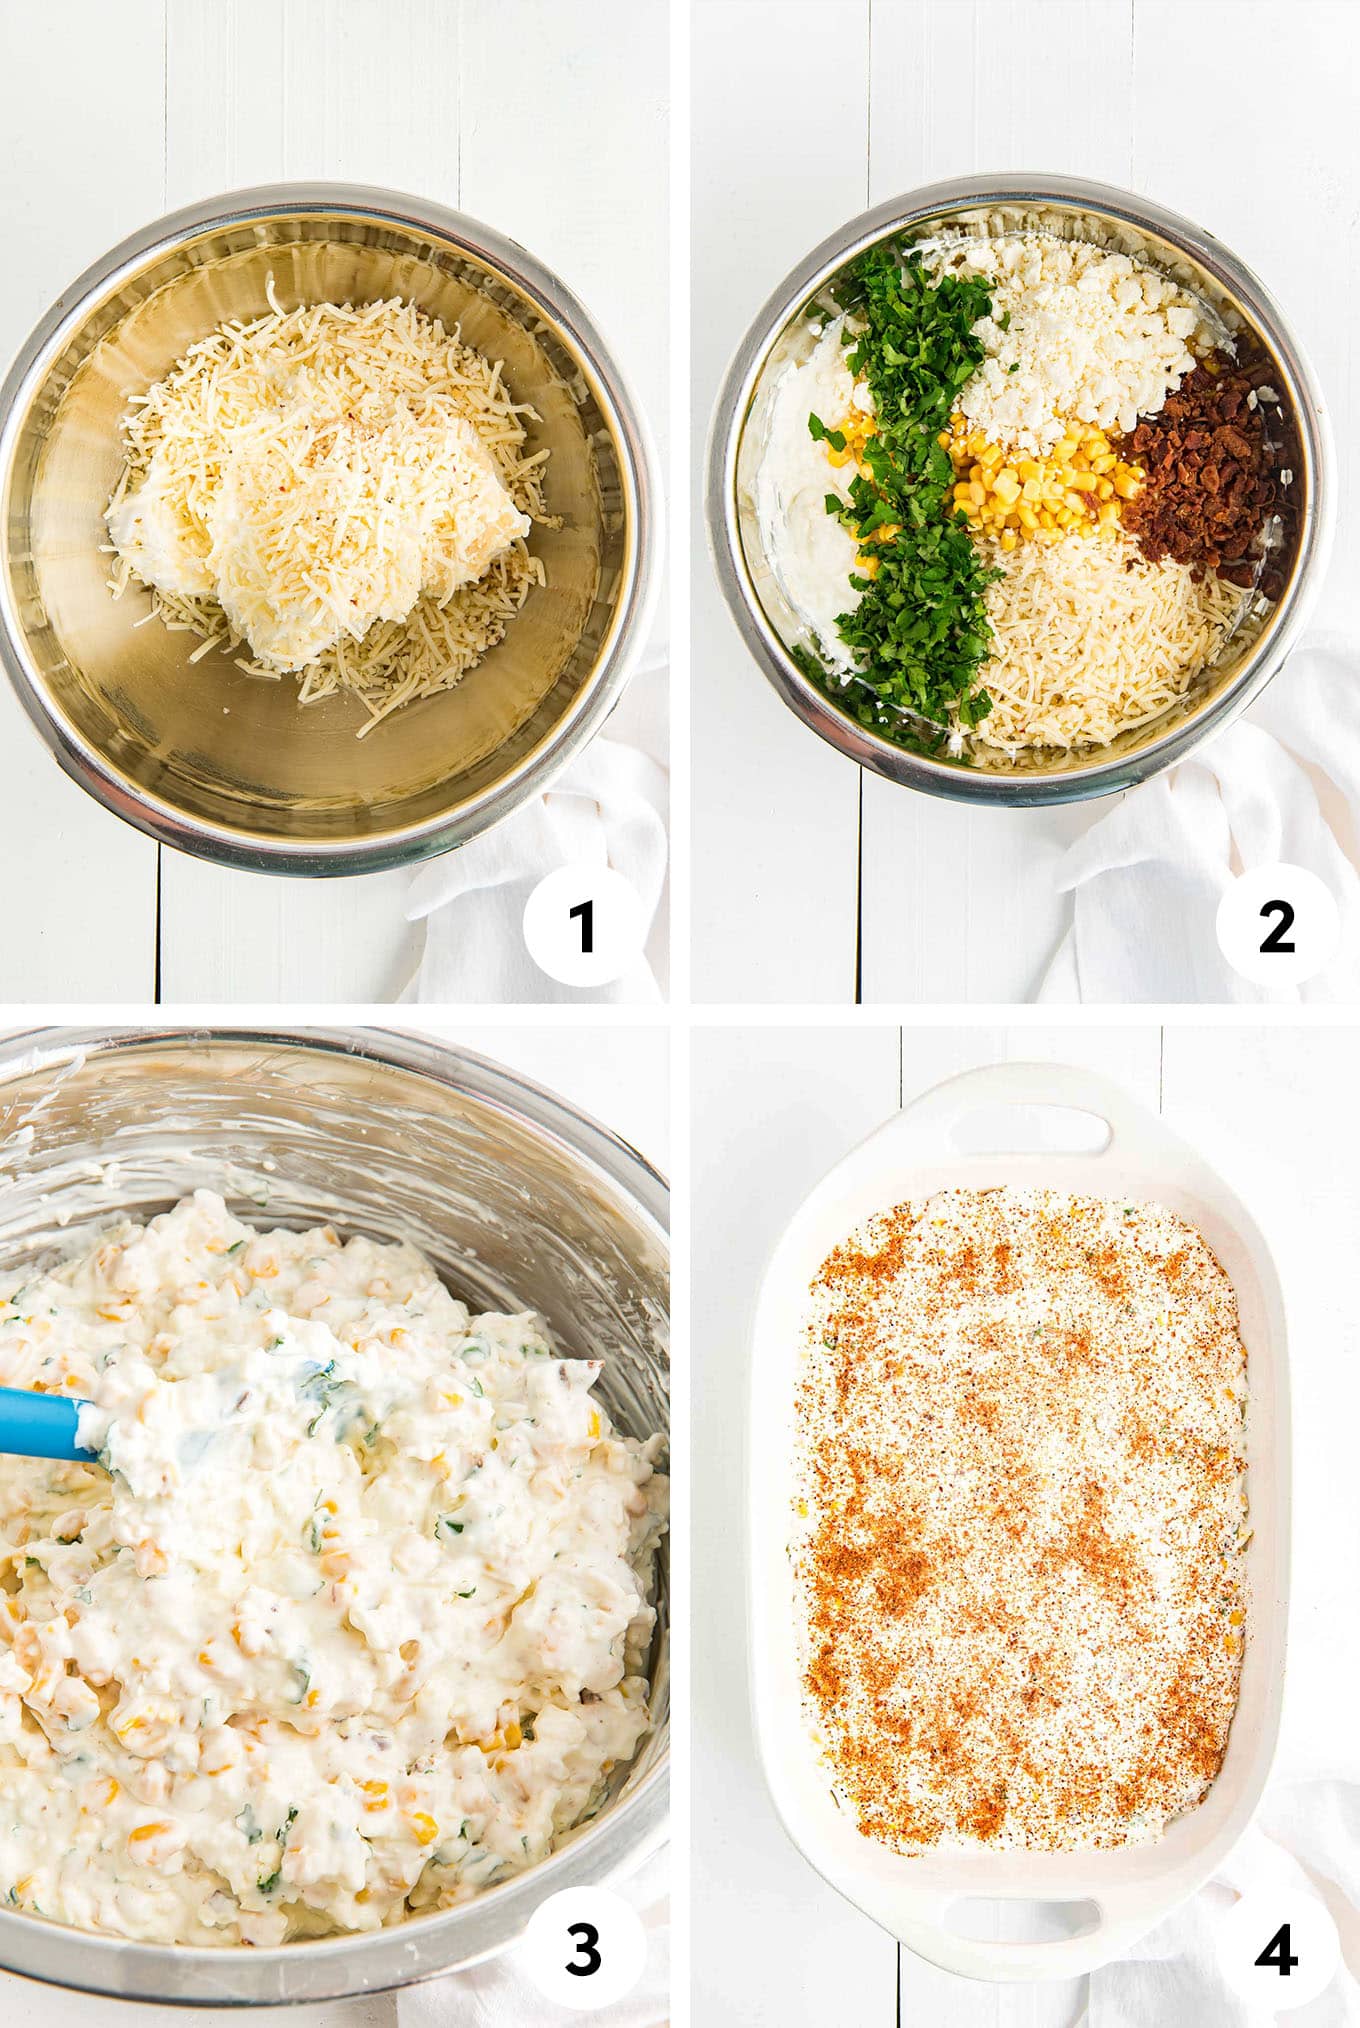 Step by step pictures for making street corn dip.